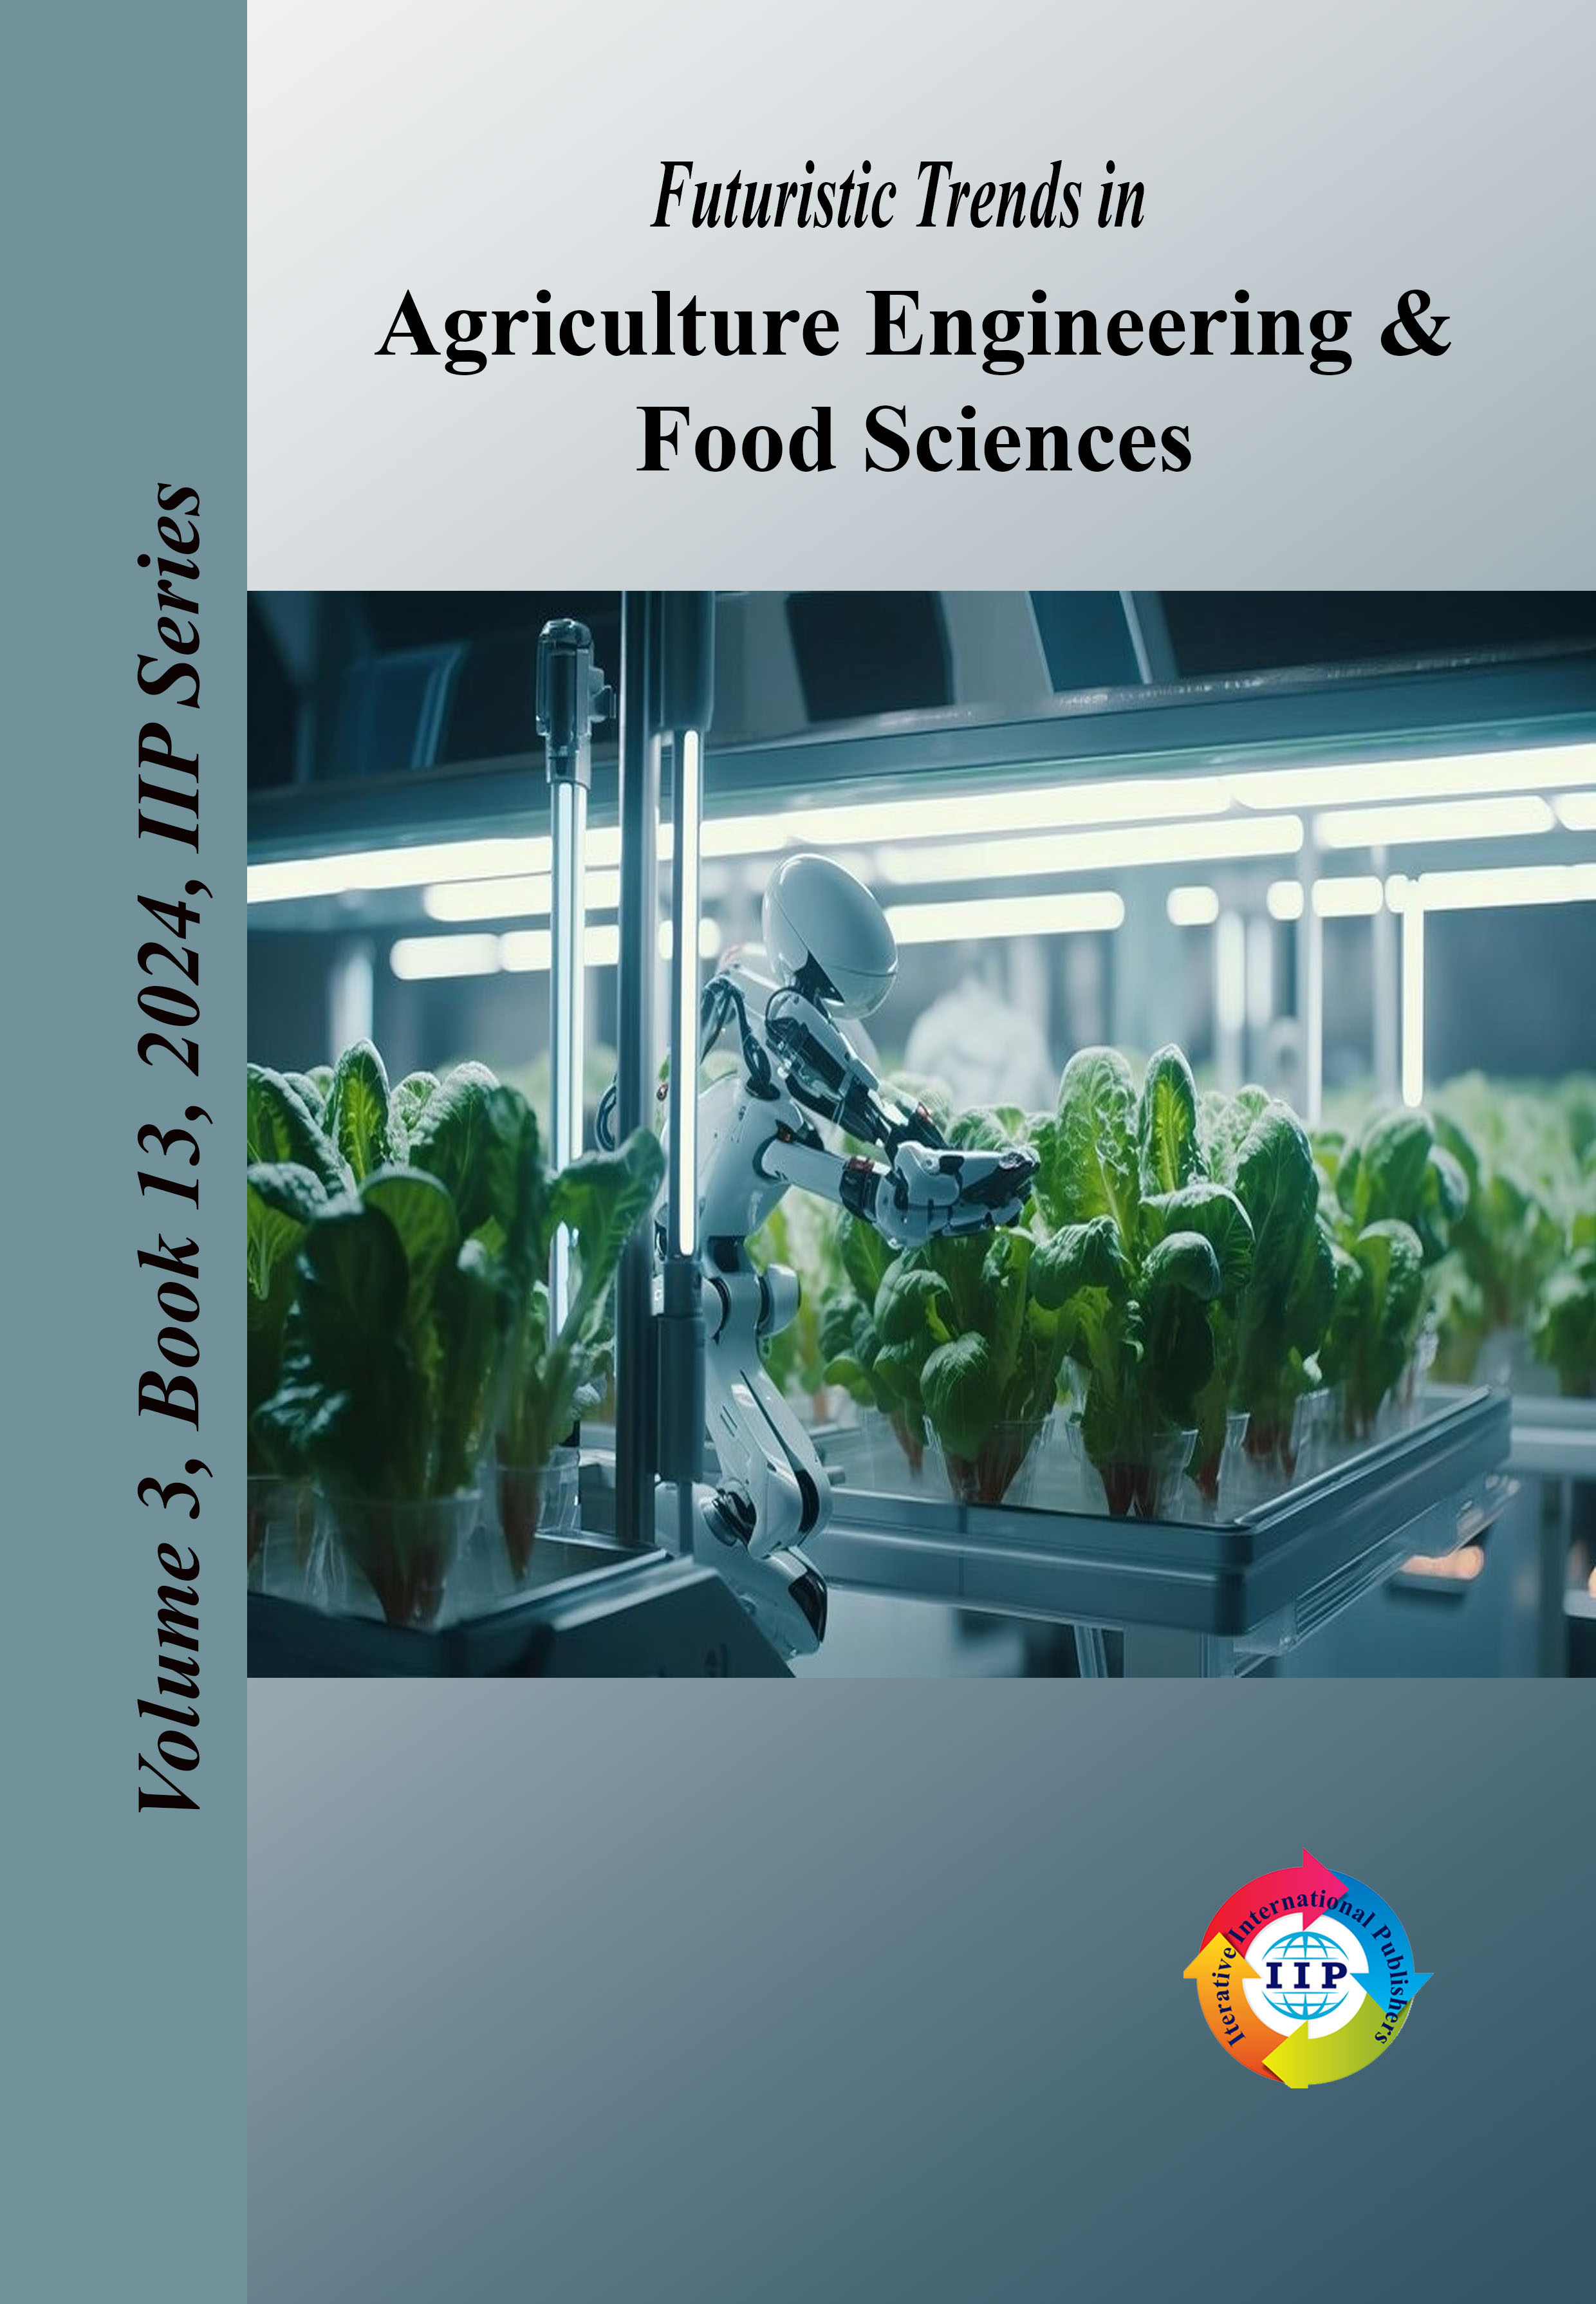 Futuristic Trends in Agriculture Engineering & Food Sciences Volume 3 Book 13